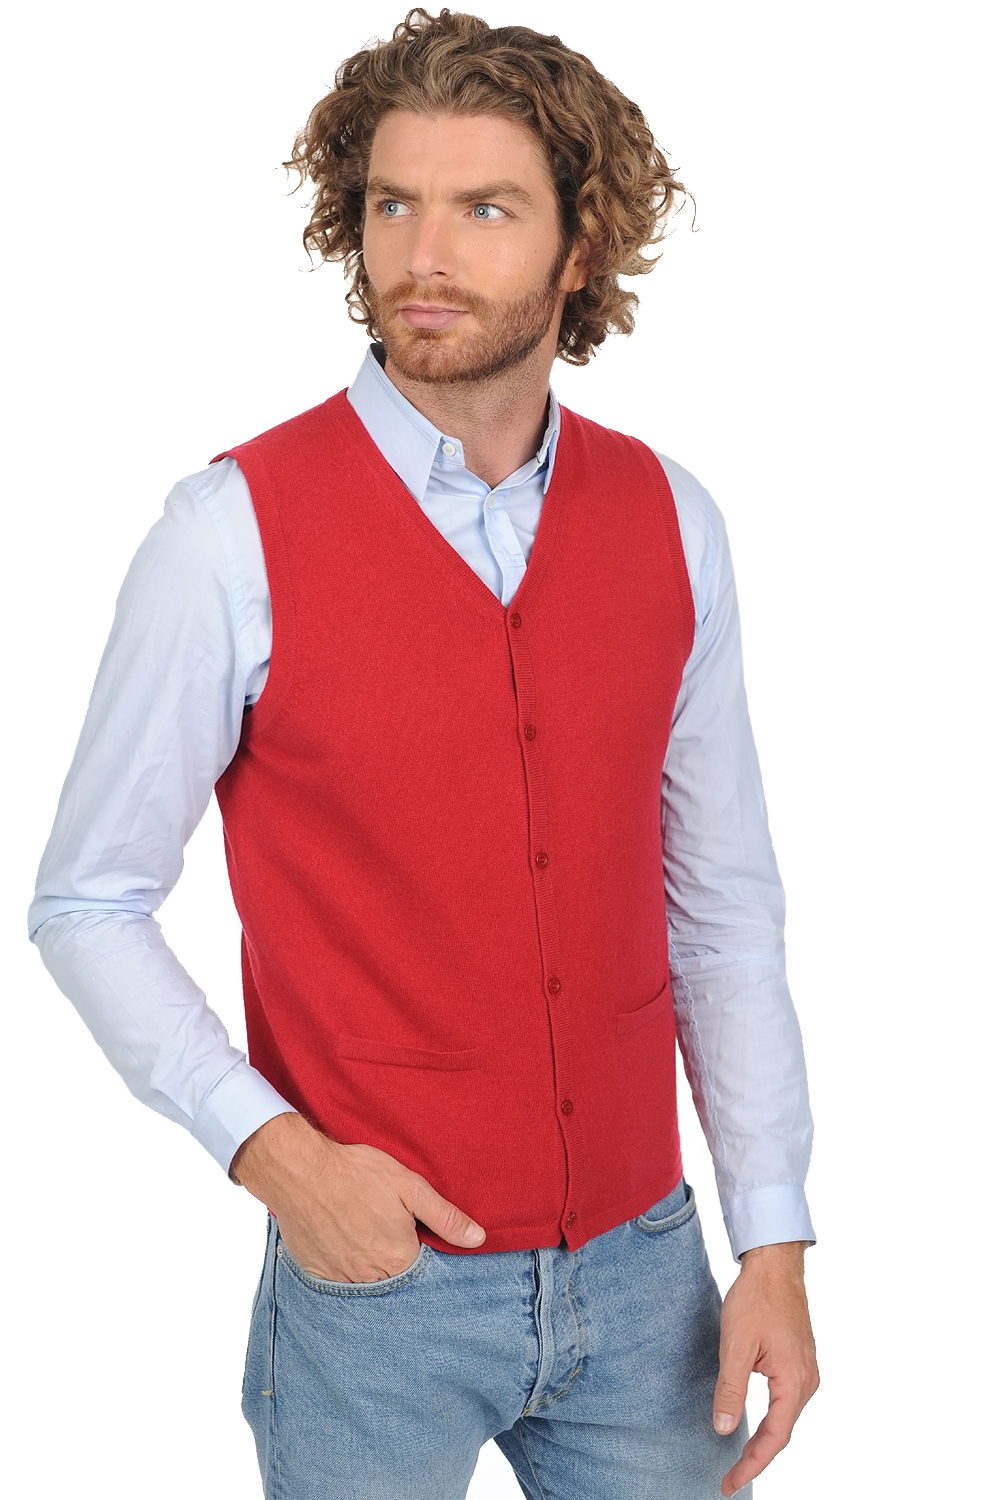 Cashmere men timeless classics basile blood red xl